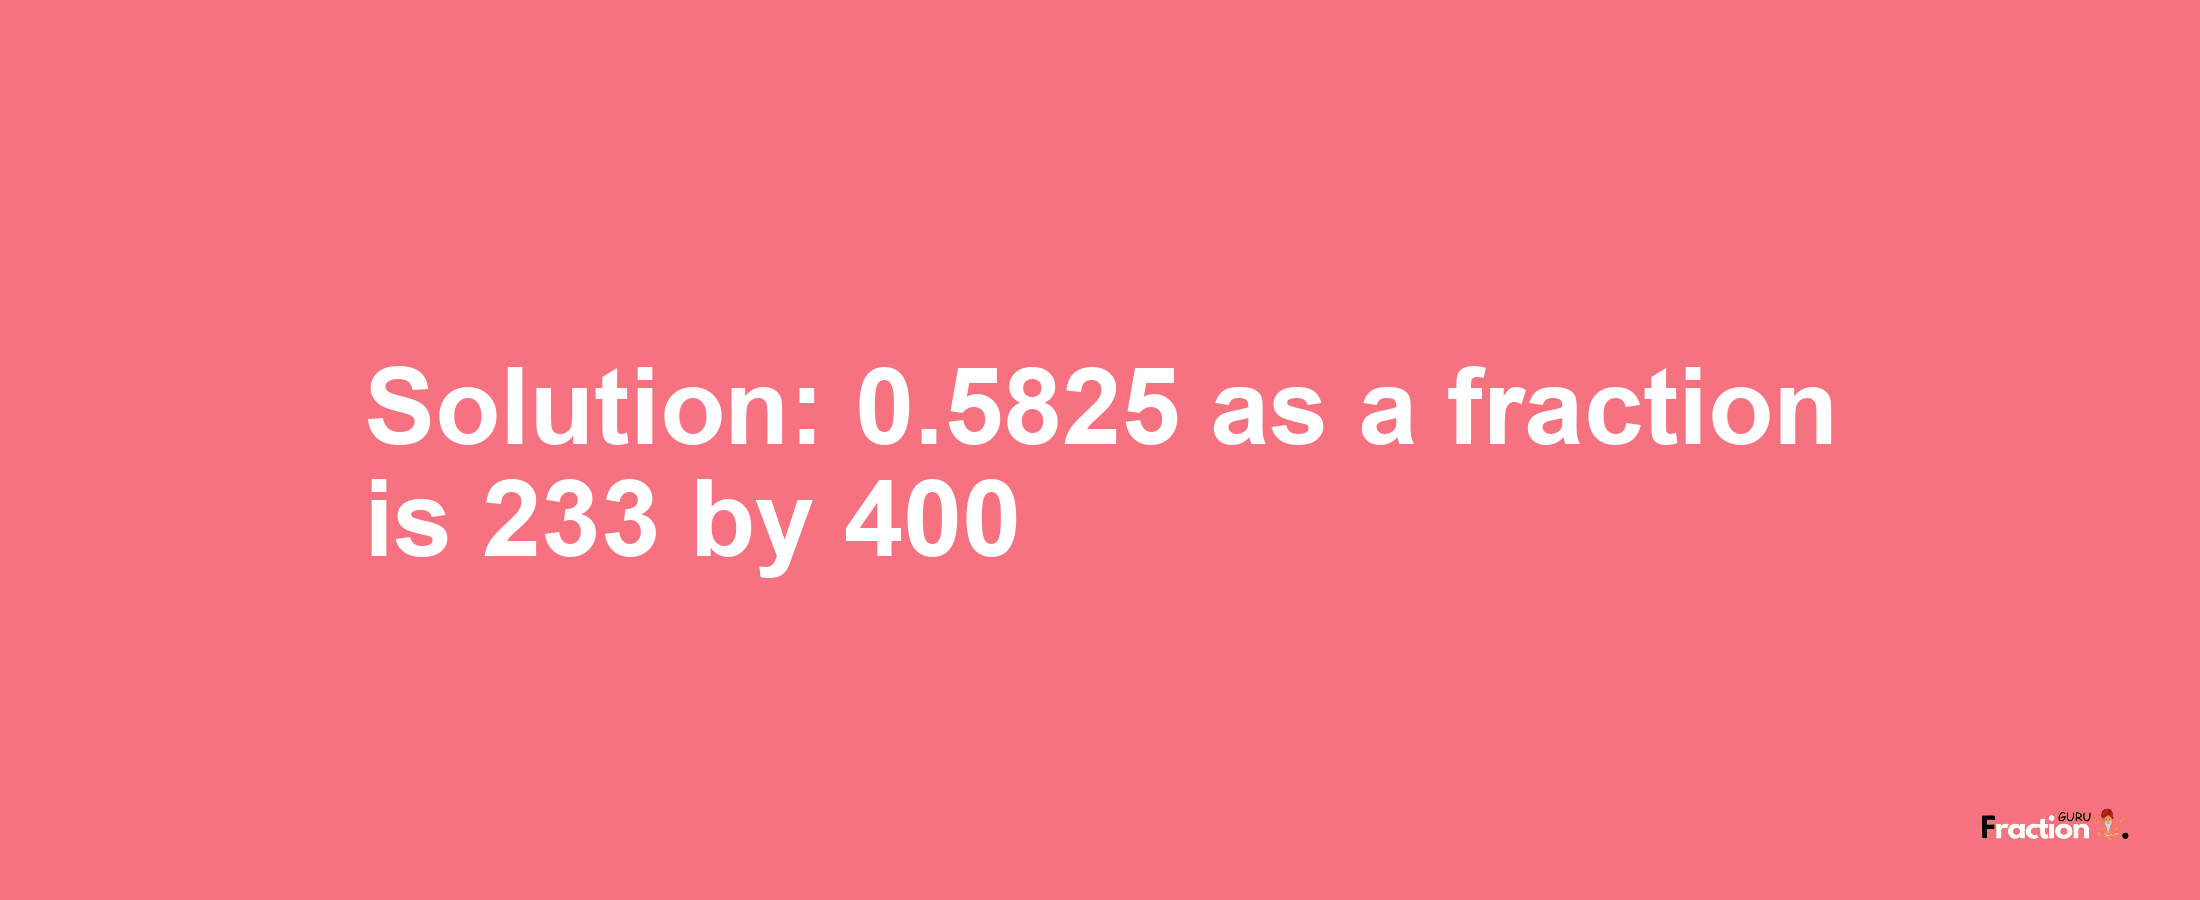 Solution:0.5825 as a fraction is 233/400